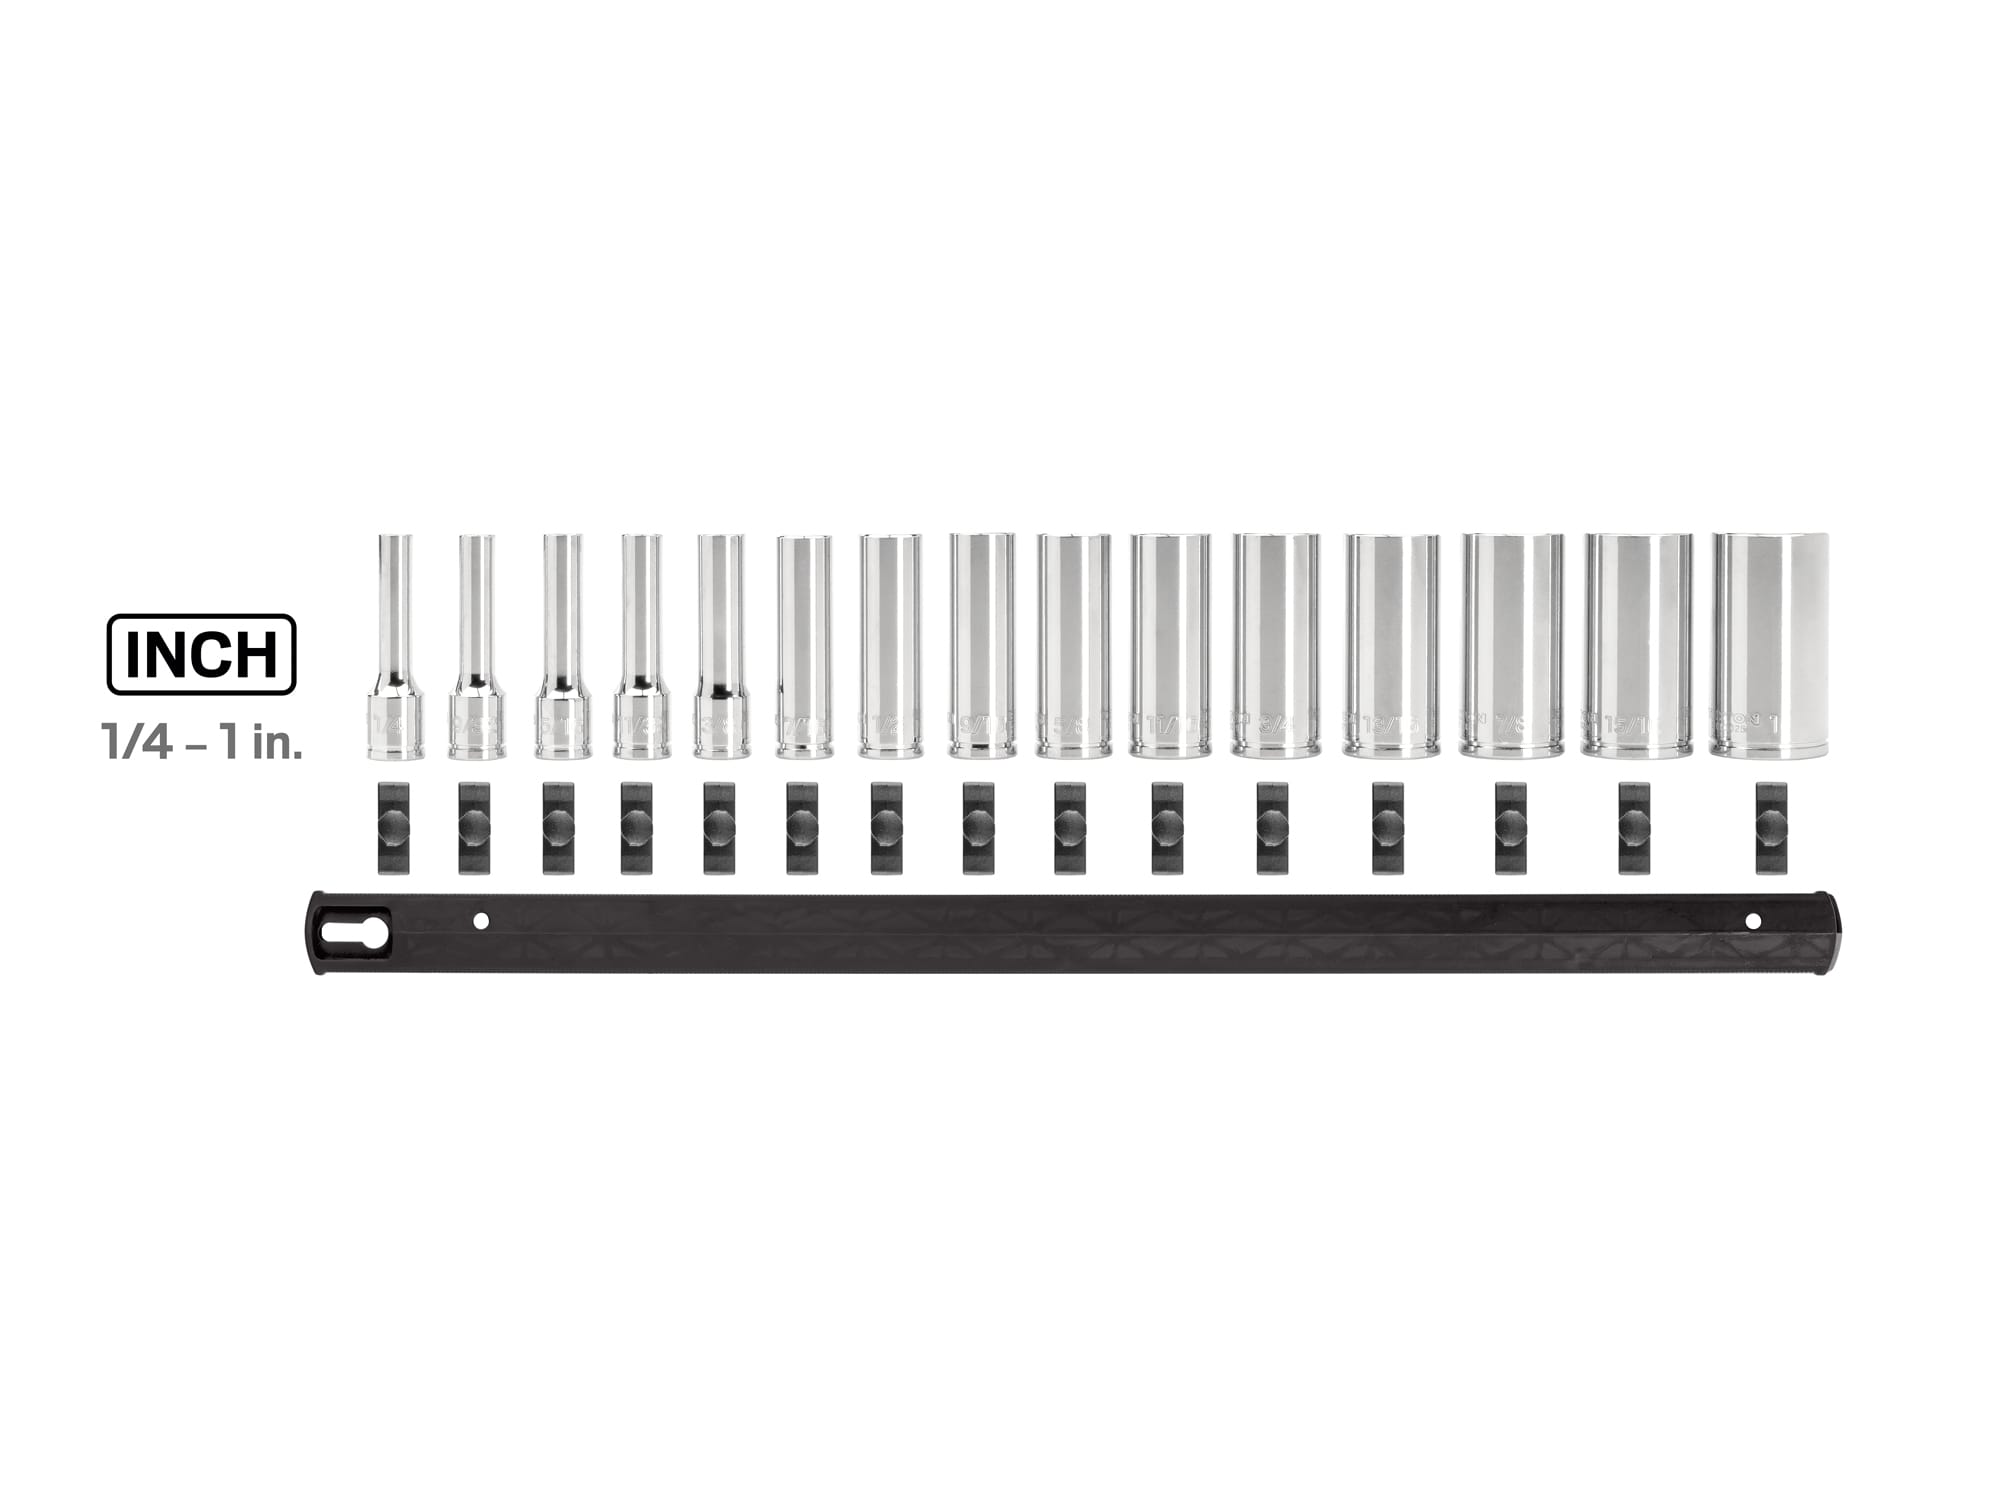 3/8 Inch Drive Deep 6-Point Socket Set with Rail, 15-Piece (1/4-1 in.)